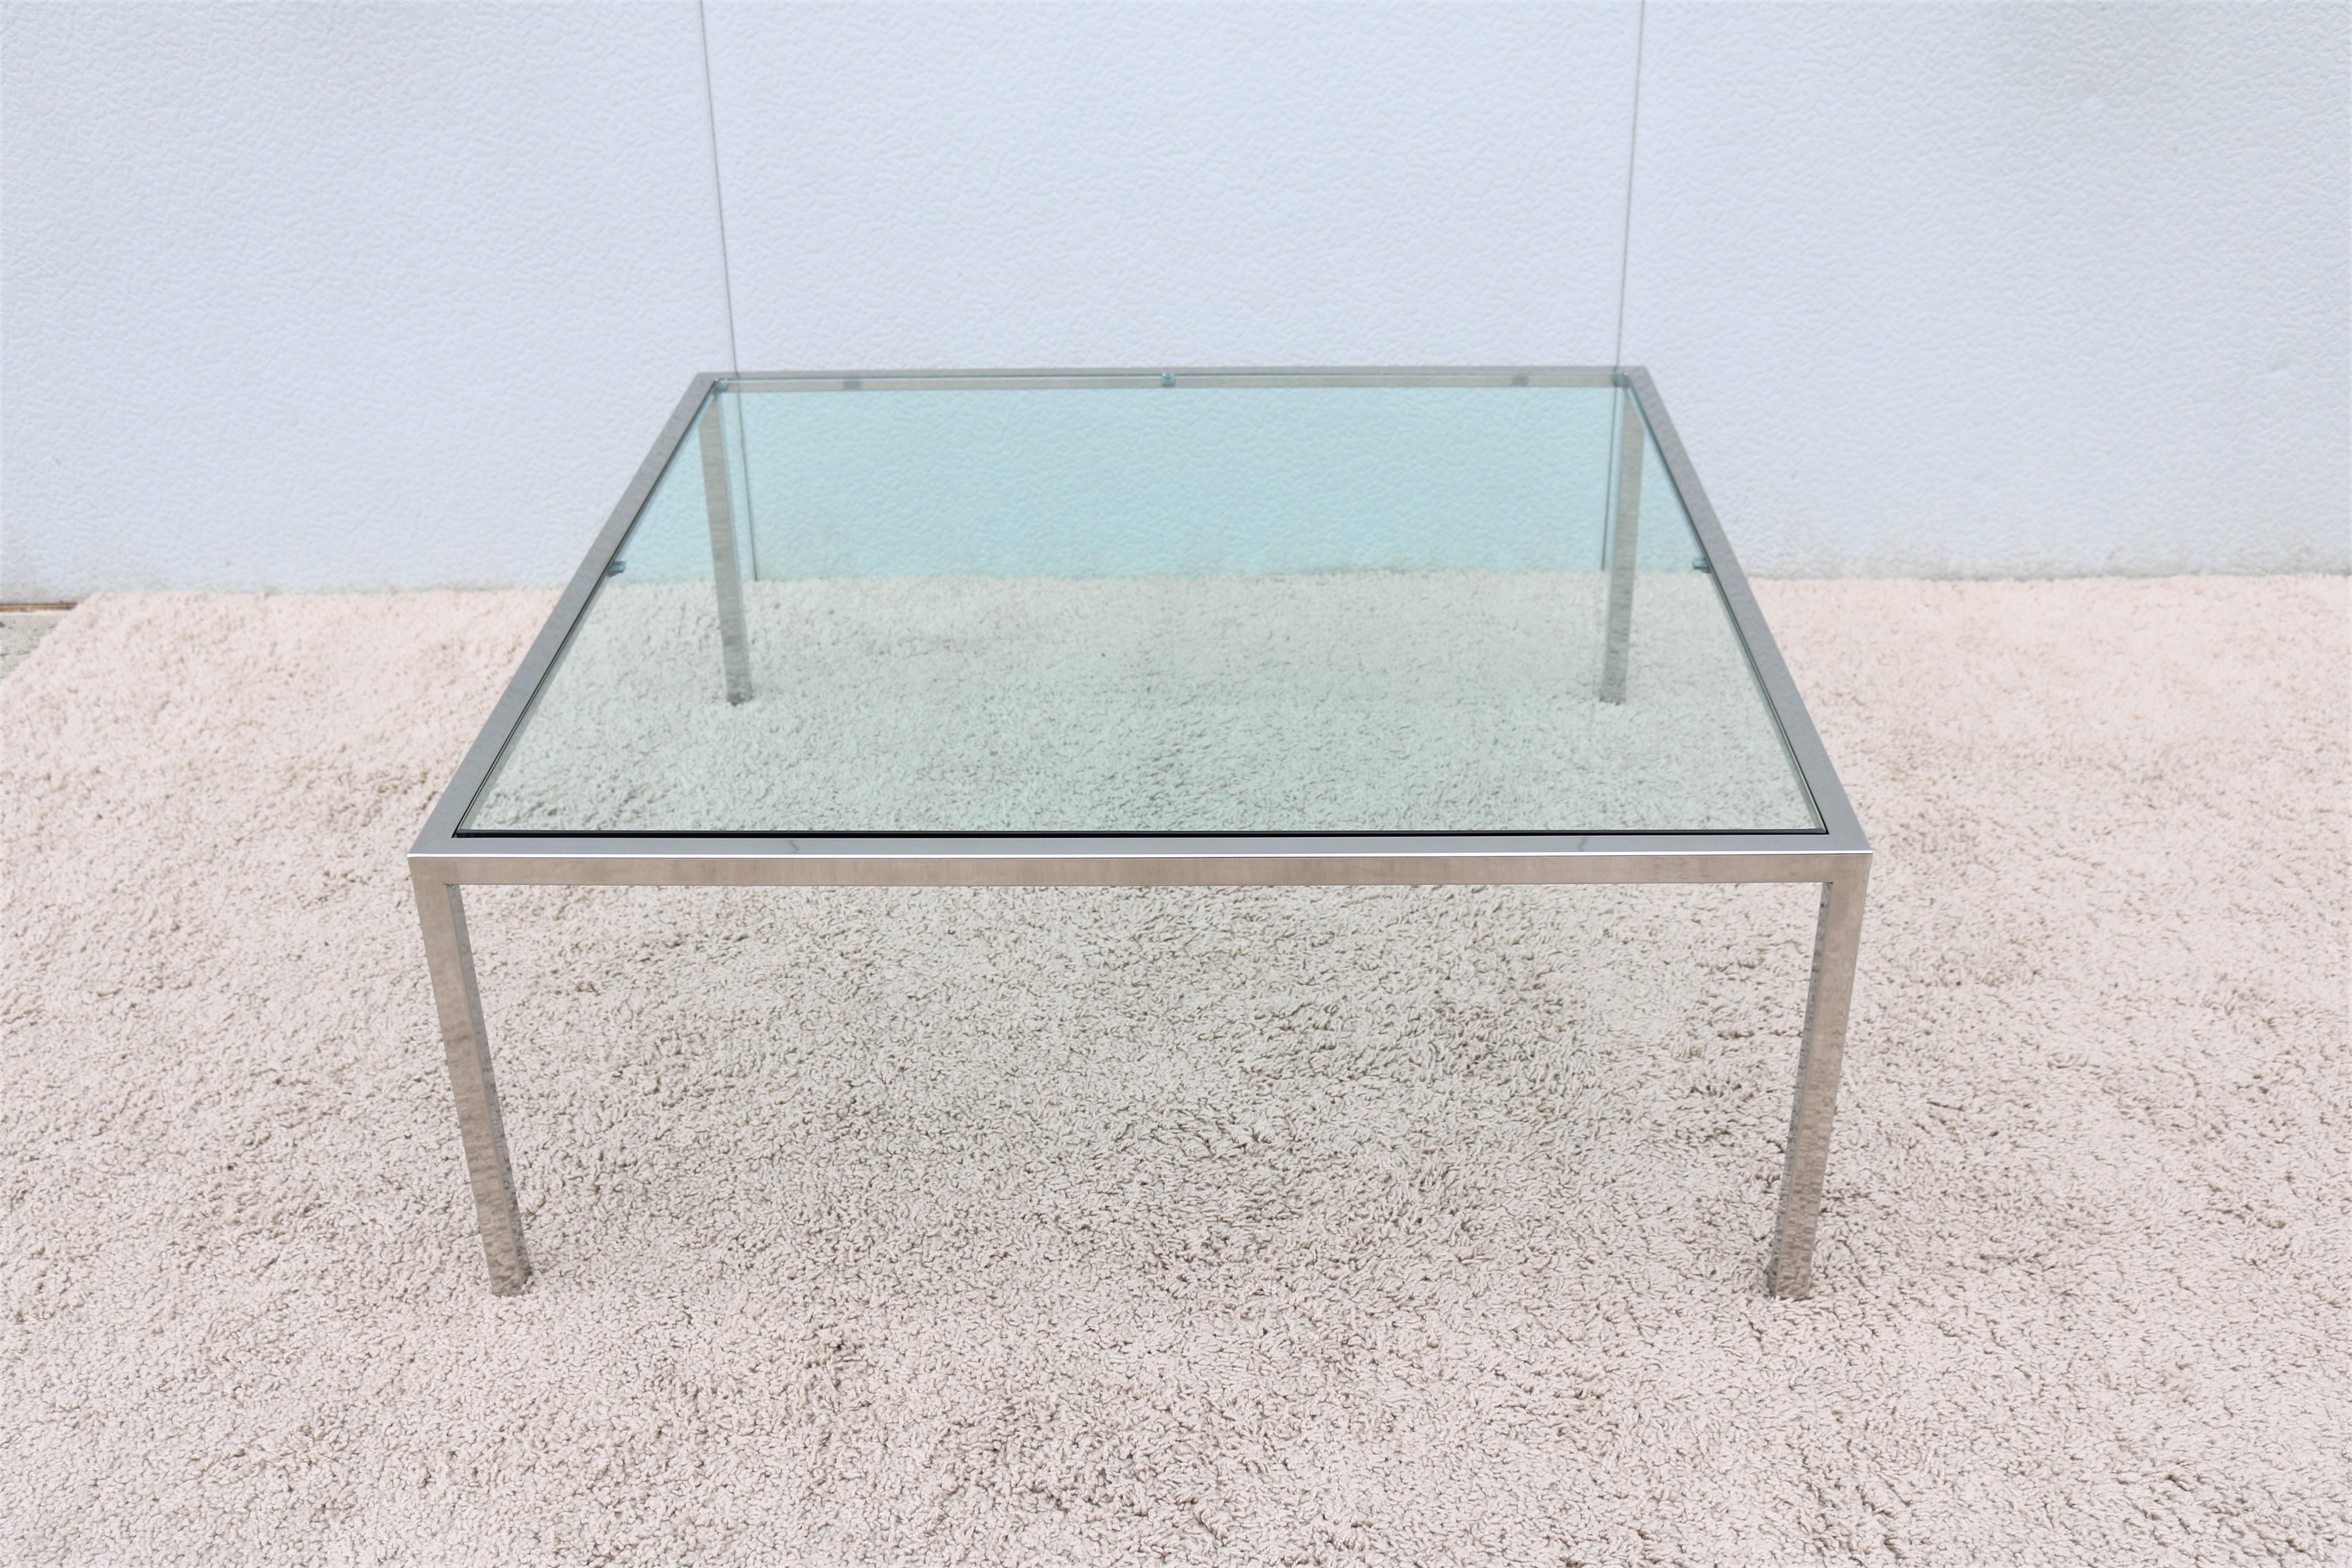 Stunning and elegant looking Mid-Century Modern Milo Baughman style polished Stainless Steel and inset glass top square Coffee Table.
Fine quality and beautiful craftmanship make this table attractive center piece for living